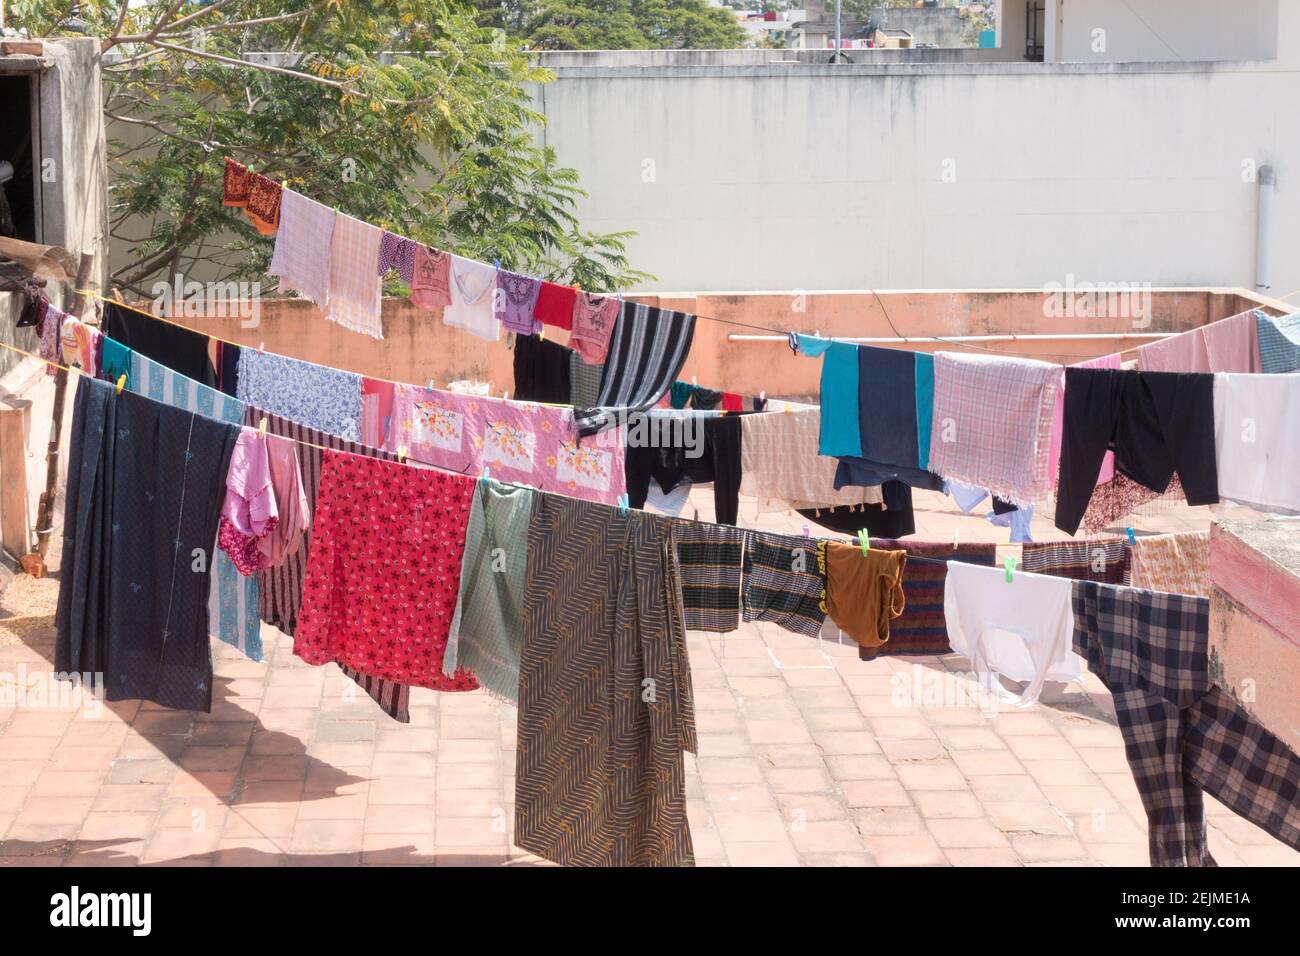 Clothers drying out on the roof on laundry lines in Chennai Stock Photo